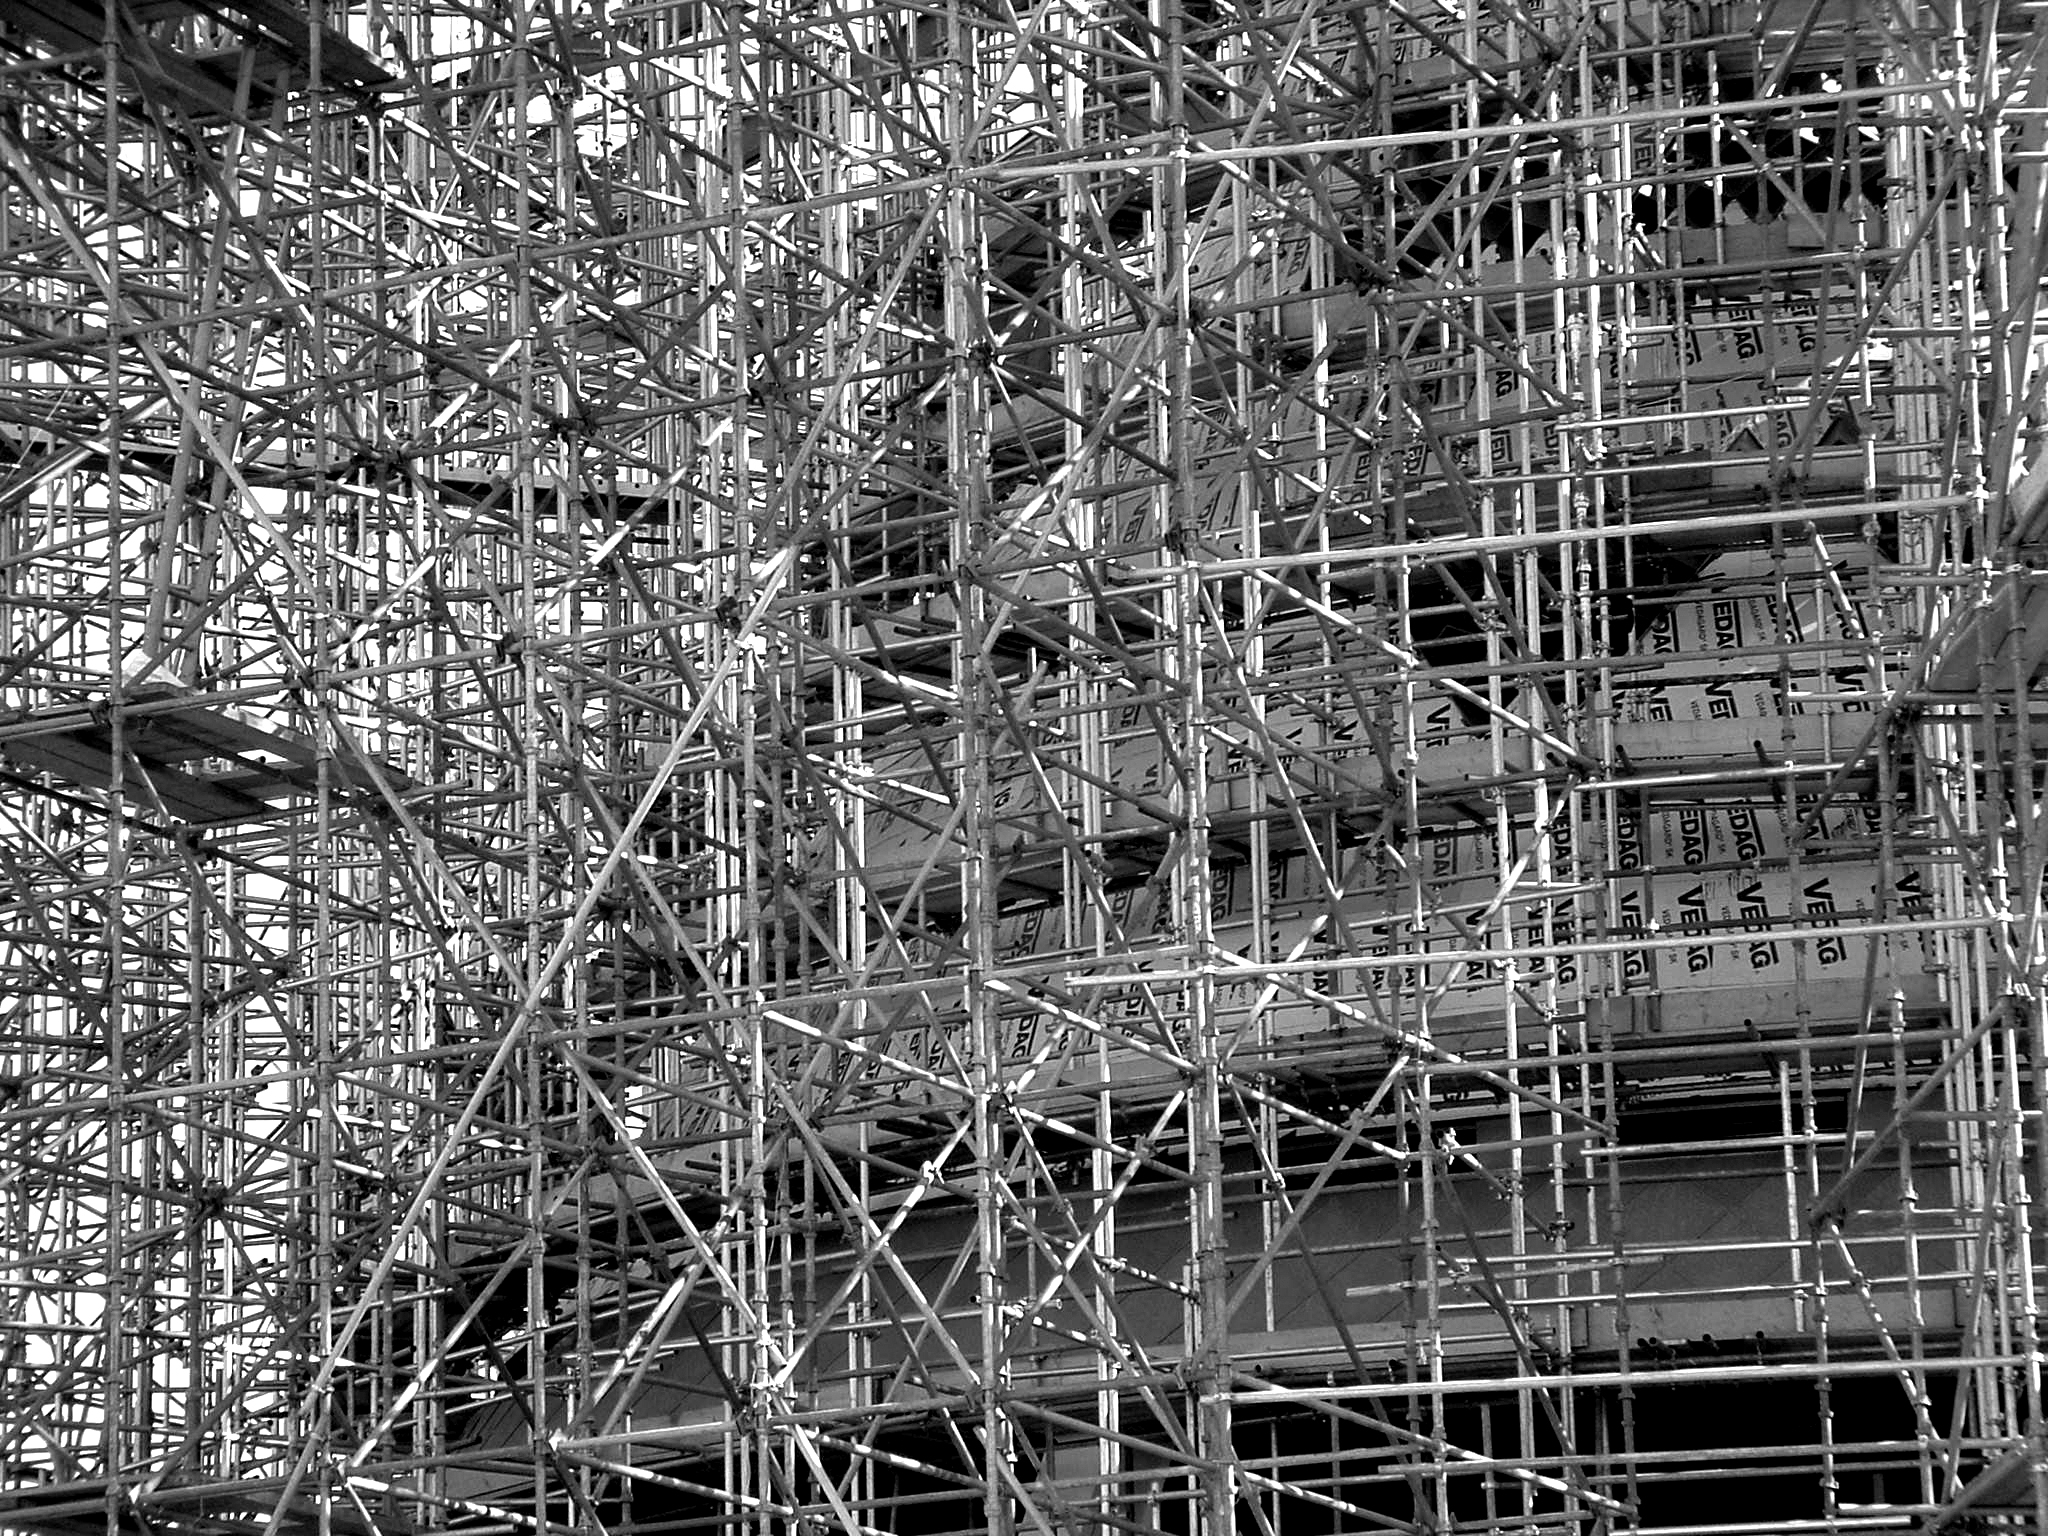 Scaffolding isn’t just useful in construction